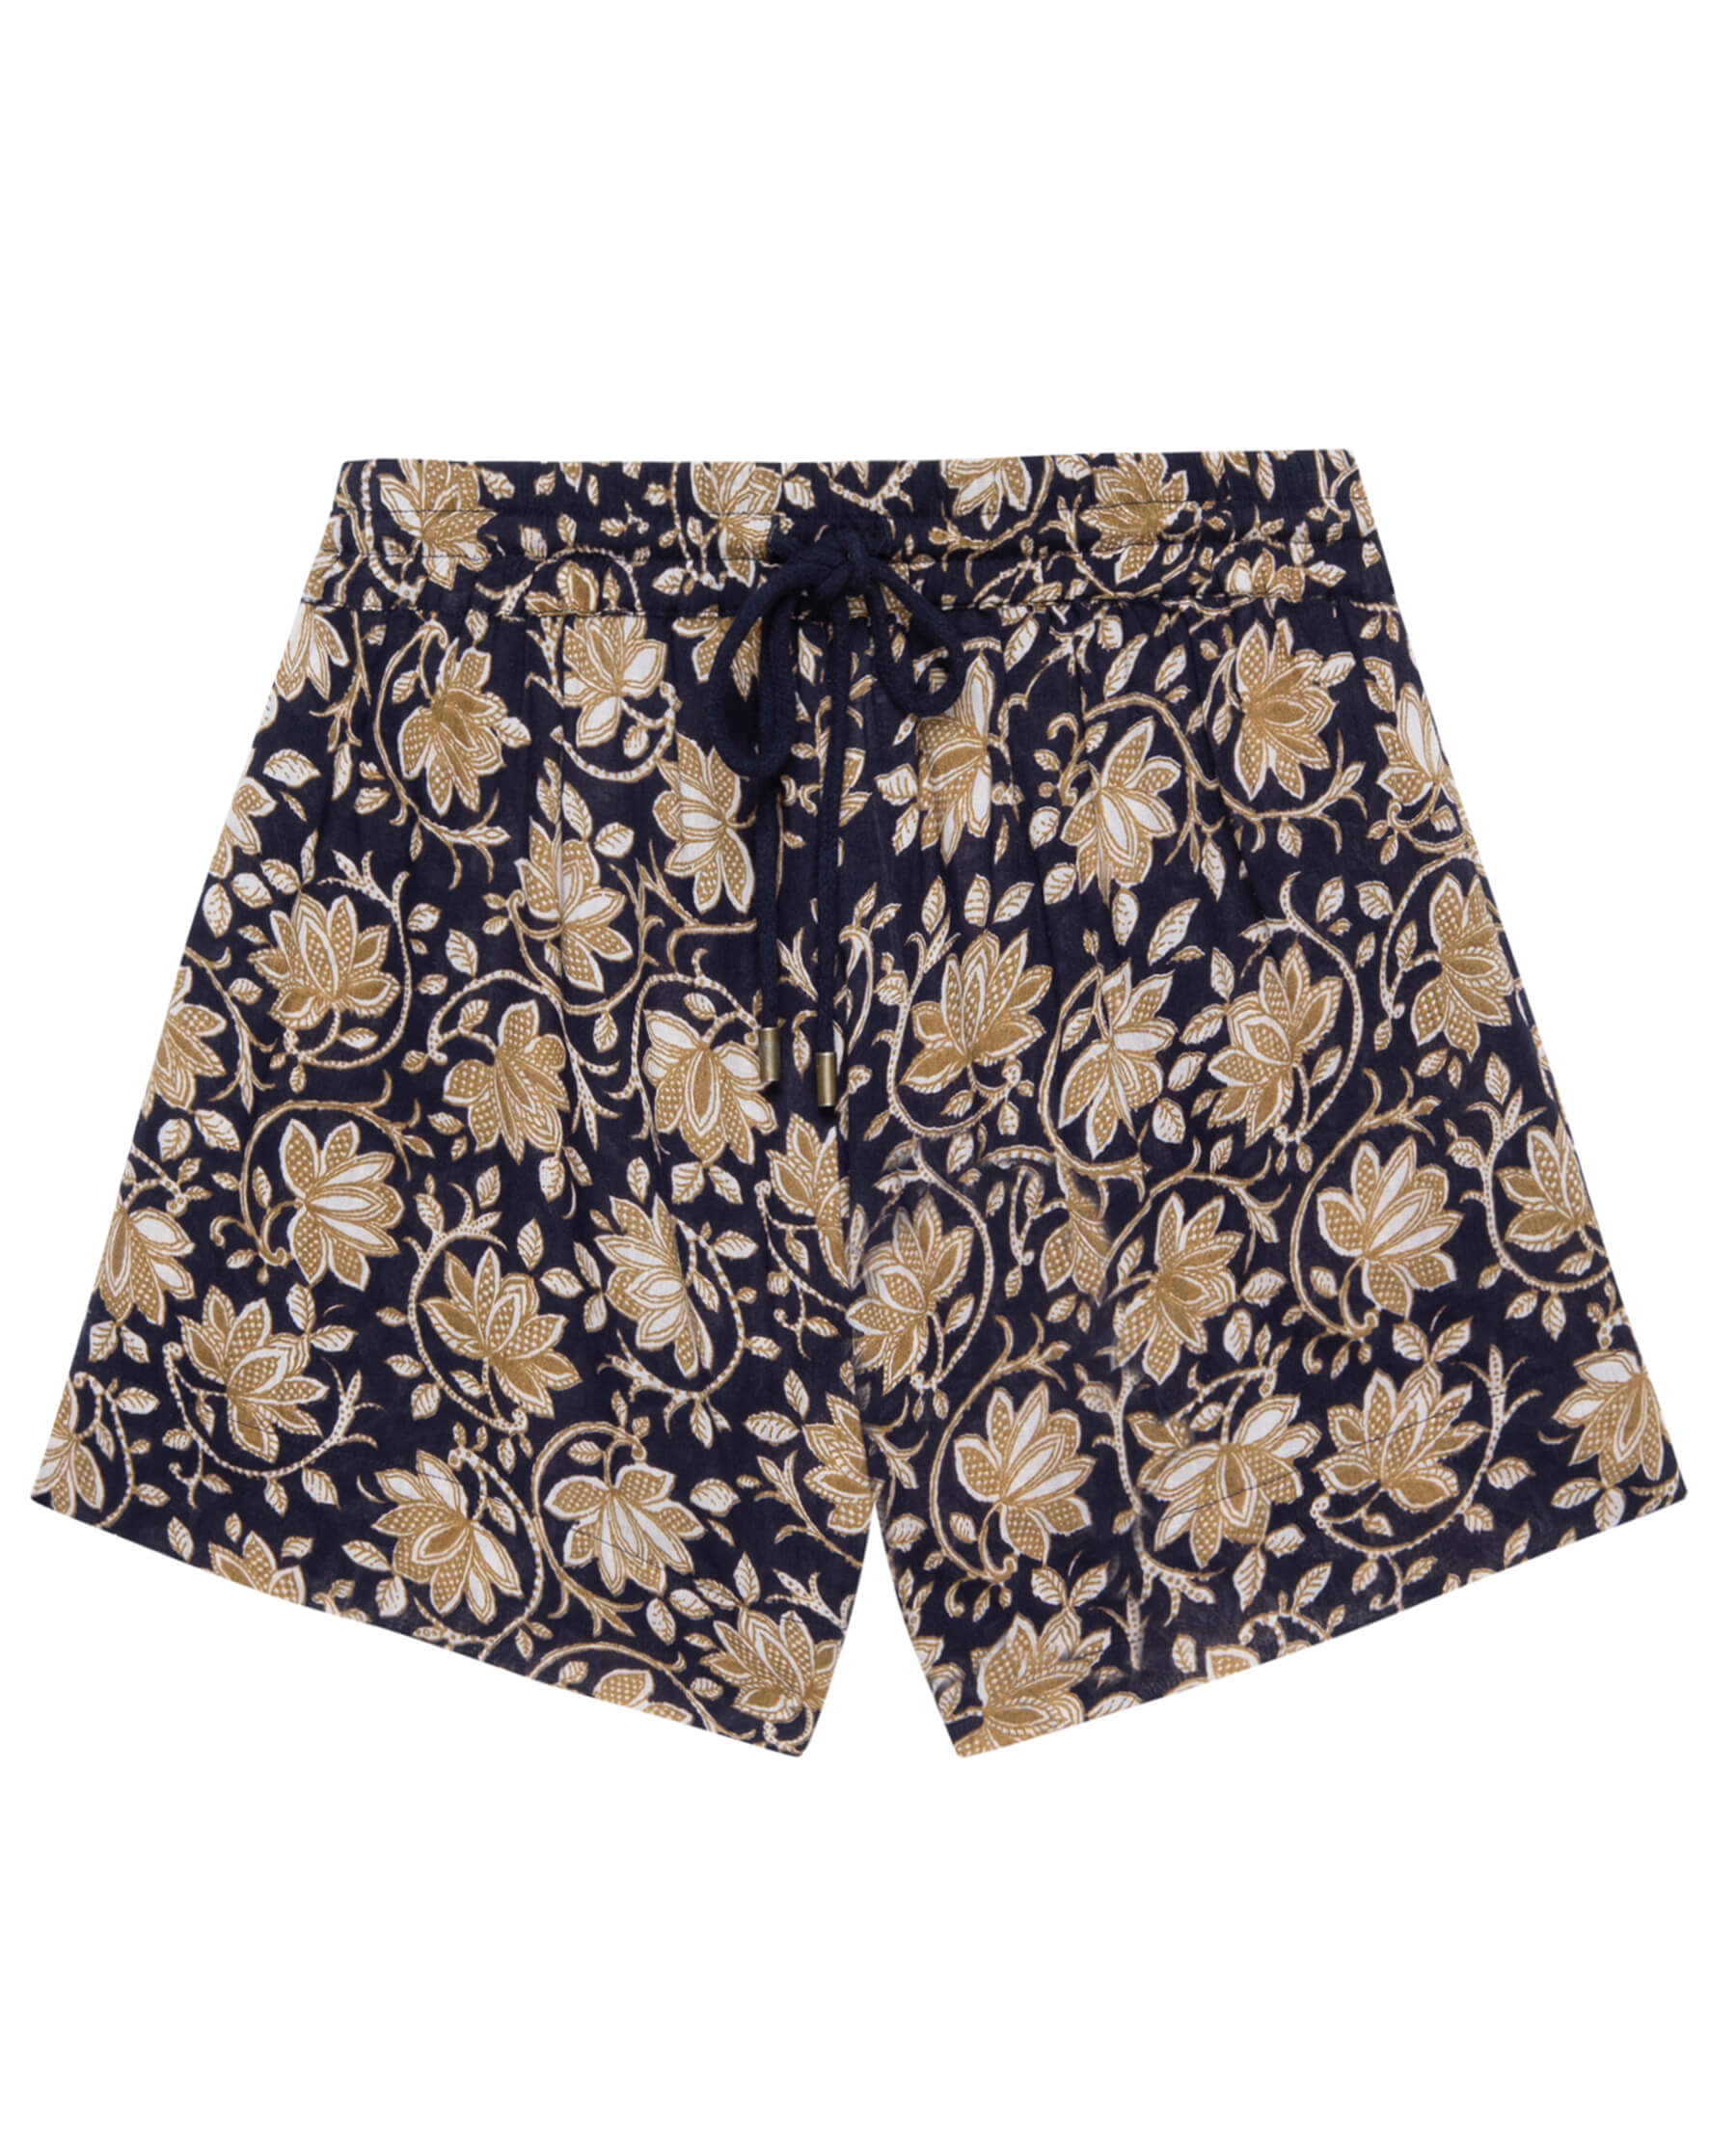 The Delta Short. -- Black Oasis Floral COVER-UP SHORTS THE GREAT. SP24 SWIM